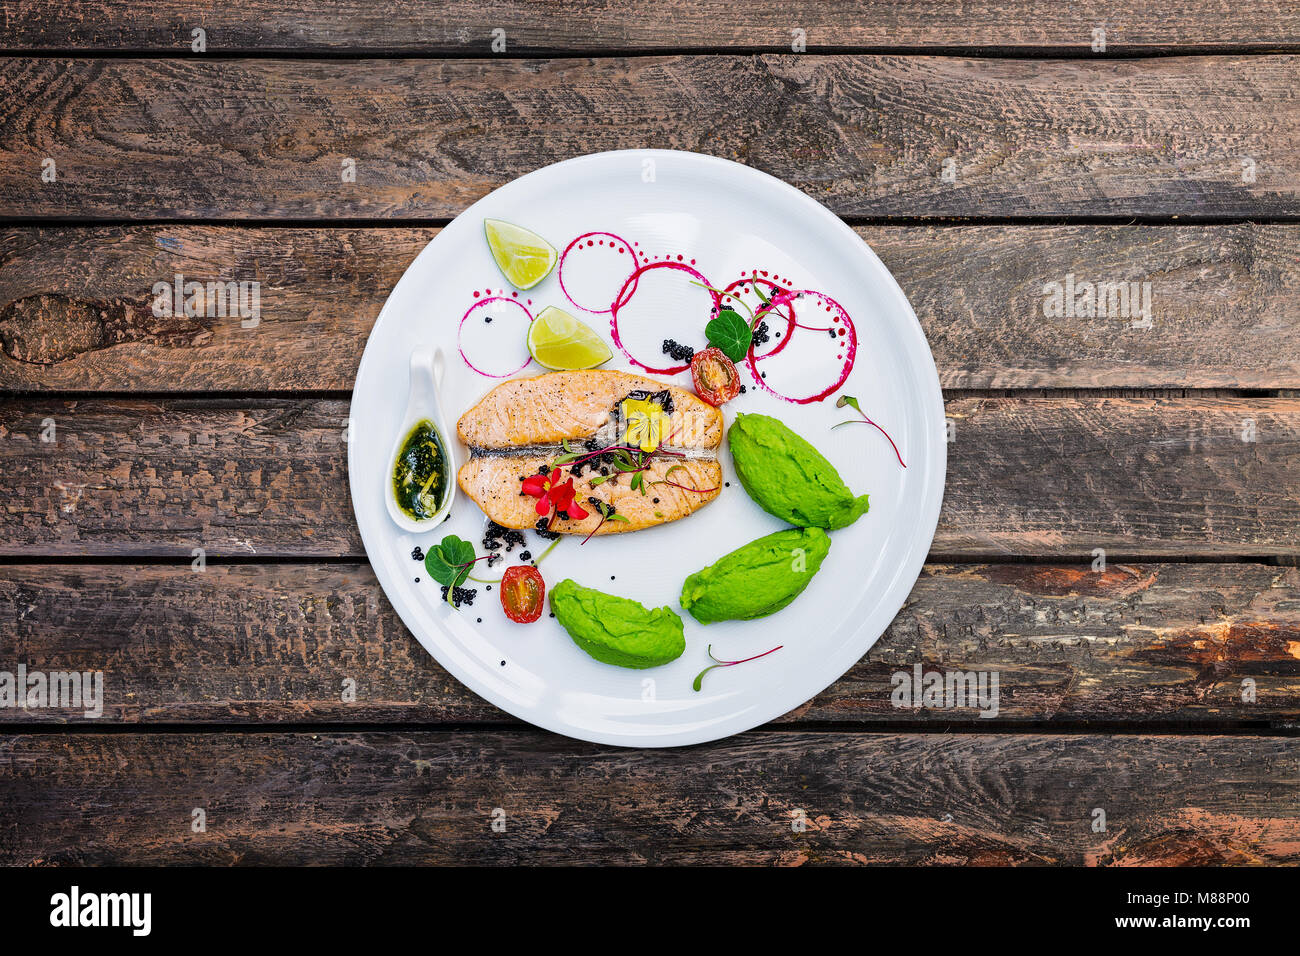 Grilled salmon with pea puree on a white plate. Stock Photo